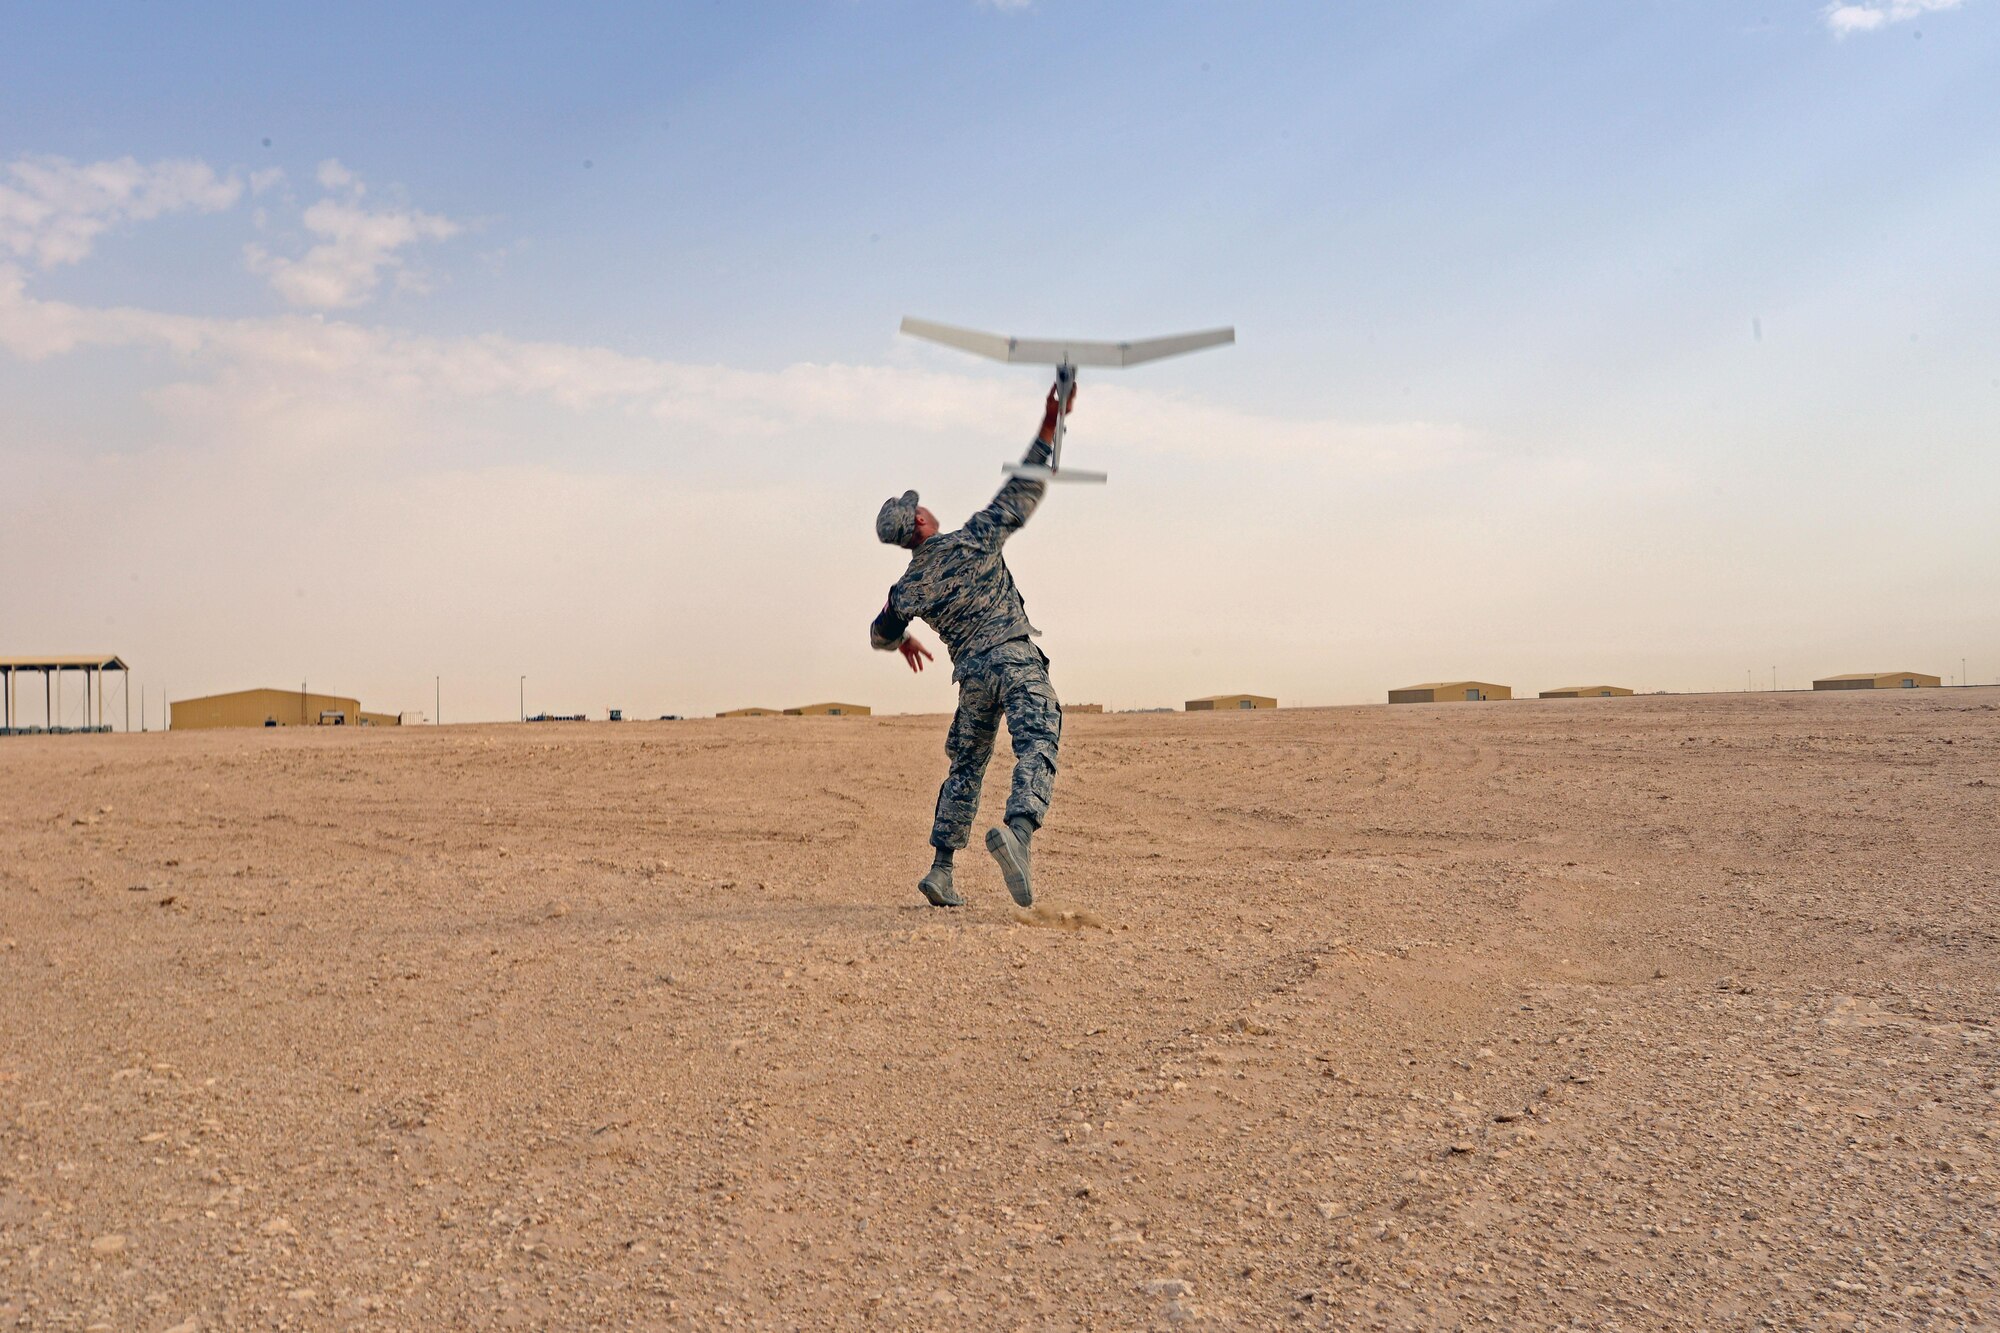 Airman Michael Puckett, 379th Expeditionary Security Forces Squadron, launches an R-11B Raven Small into the “wild blue yonder” during a demonstration for senior Qatari Air Force and 379th Air Expeditionary Wing leaders, Mar 4, 2015, at Al Udeid Air Base, Qatar.  The RQ-11 Raven is a lightweight unmanned aircraft system that’s designed for rapid deployment and high-mobility for military operations. At Al Udeid, security forces Airmen use the Raven to support anti-terrorism measures like day or night aerial intelligence, surveillance, target acquisition, and reconnaissance. This is the first time since 2005 that the Raven has been used at Al Udeid. (Air Force photo by Master Sgt. Kerry Jackson)